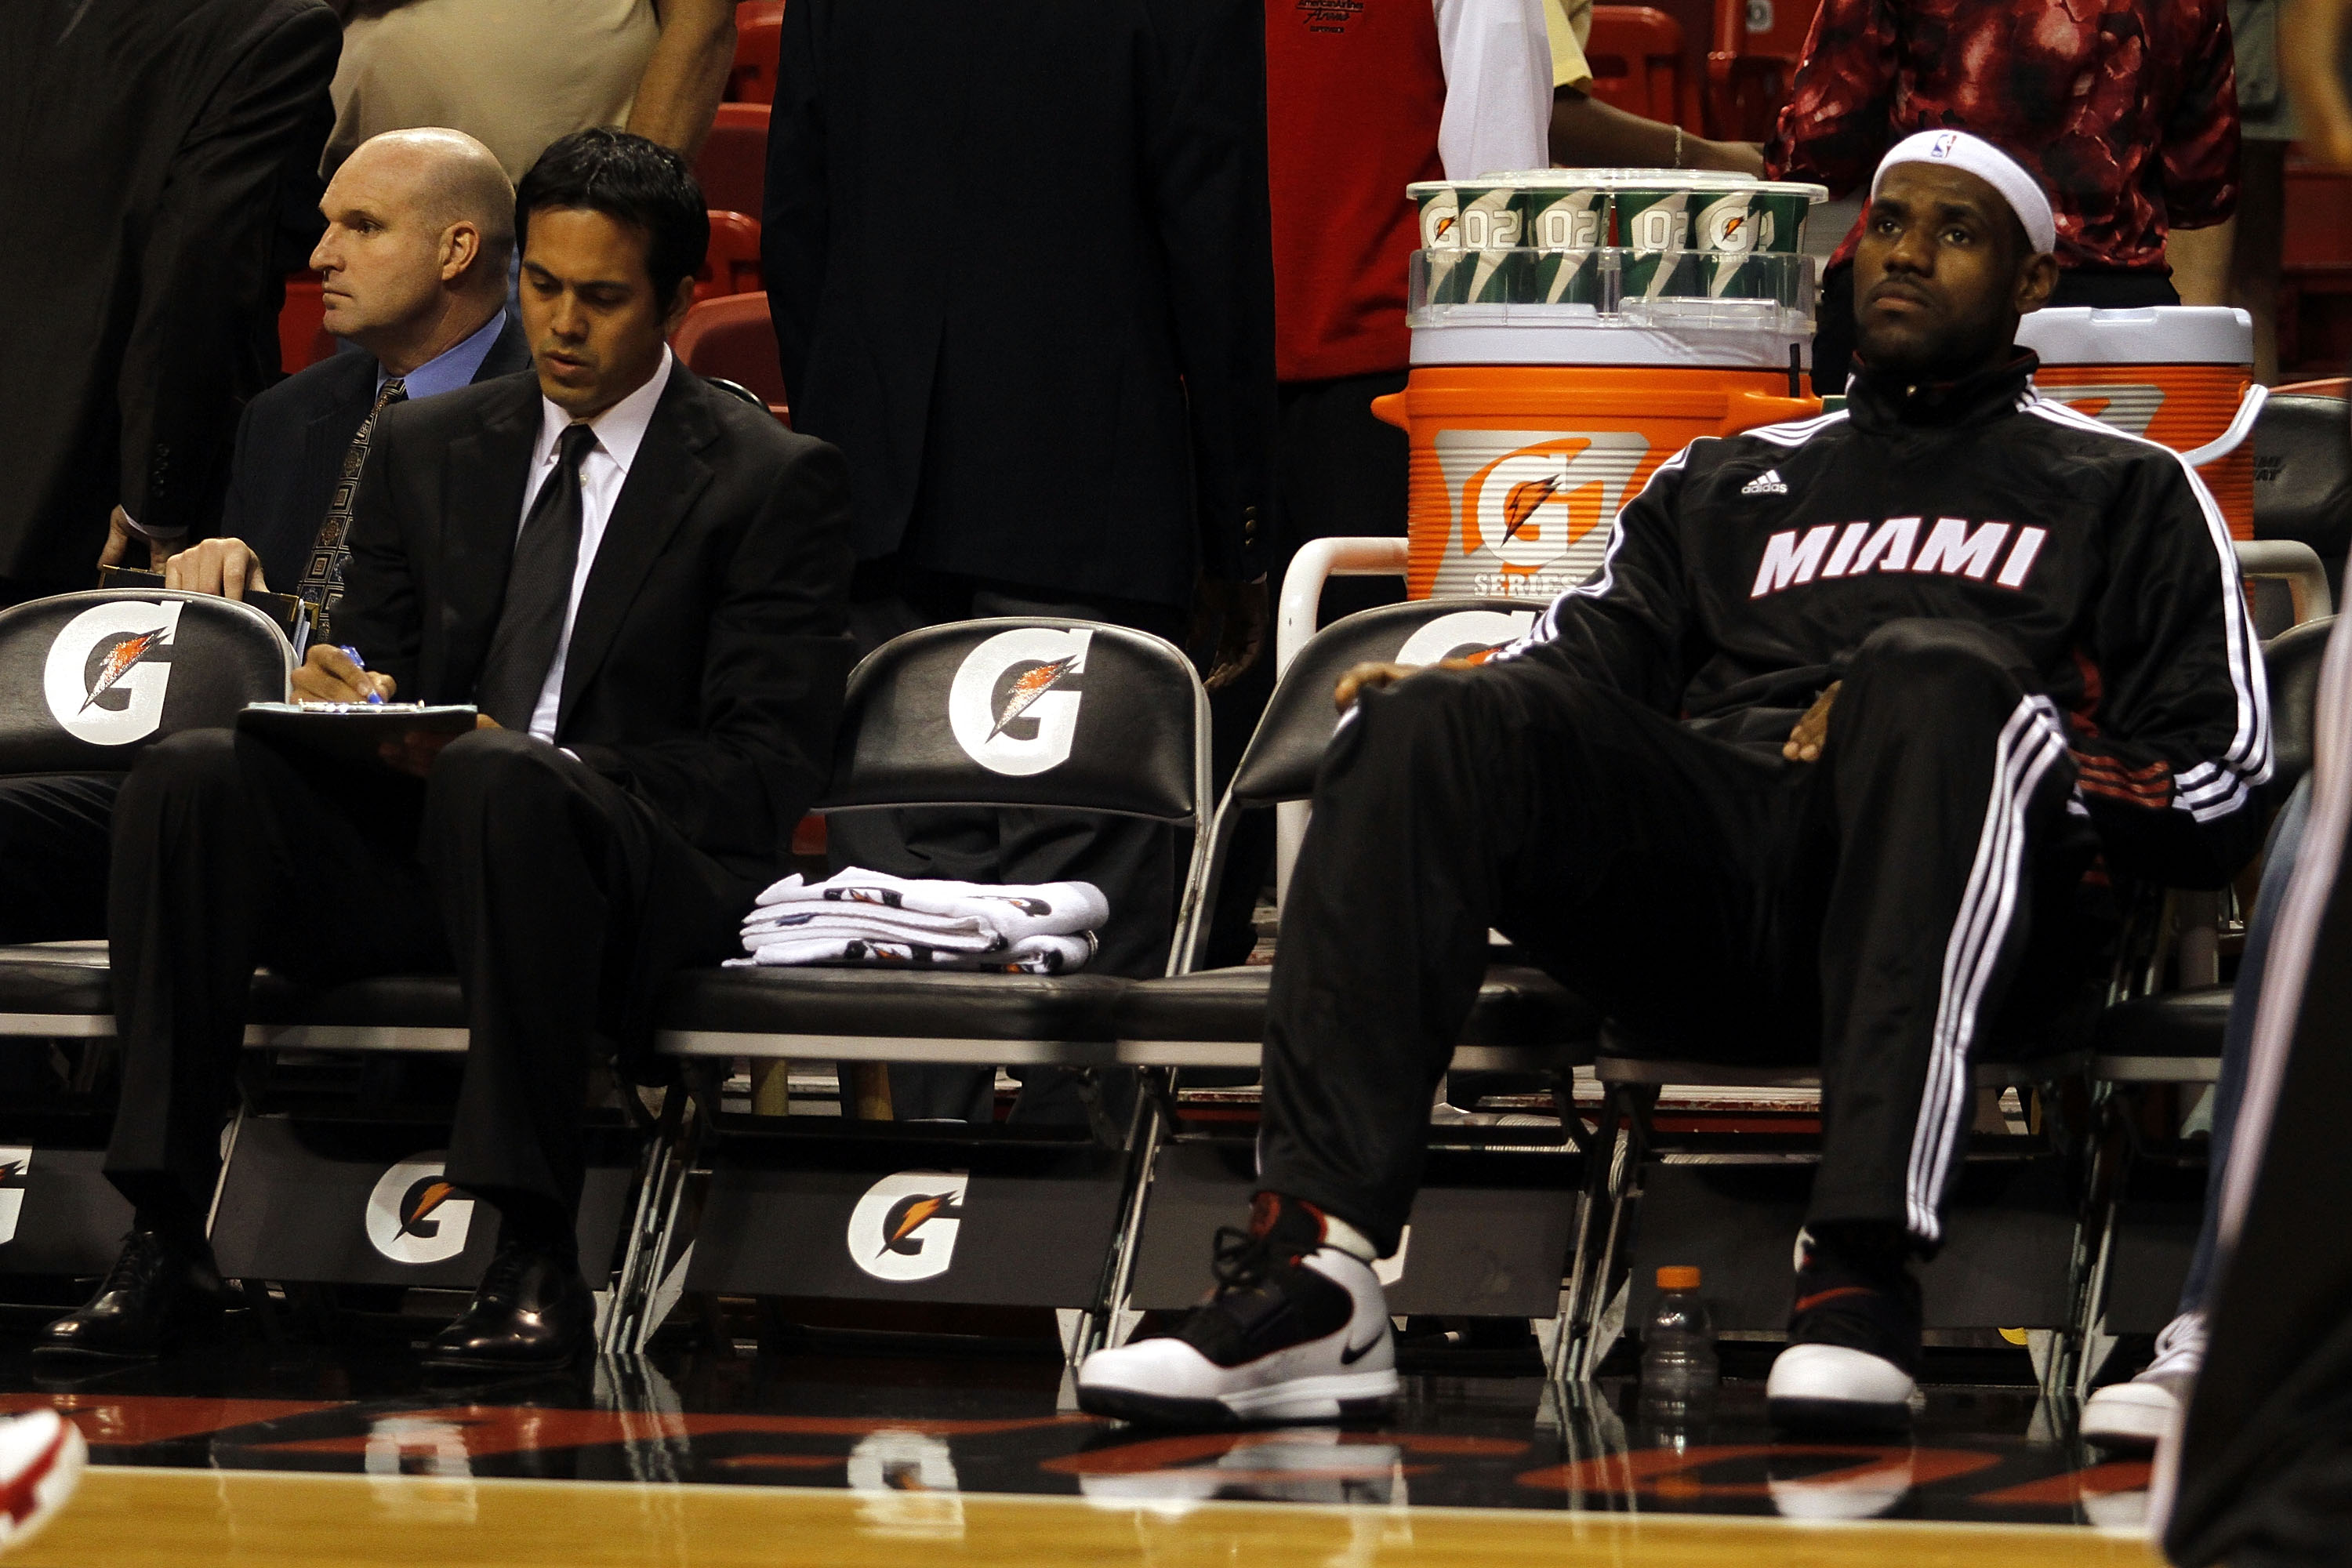 Miami Heat's head coach Spoelstra talks with LeBron James in the pre-game  huddle before the start of their NBA game against the Washington Wizards in  Miami Photo #124279